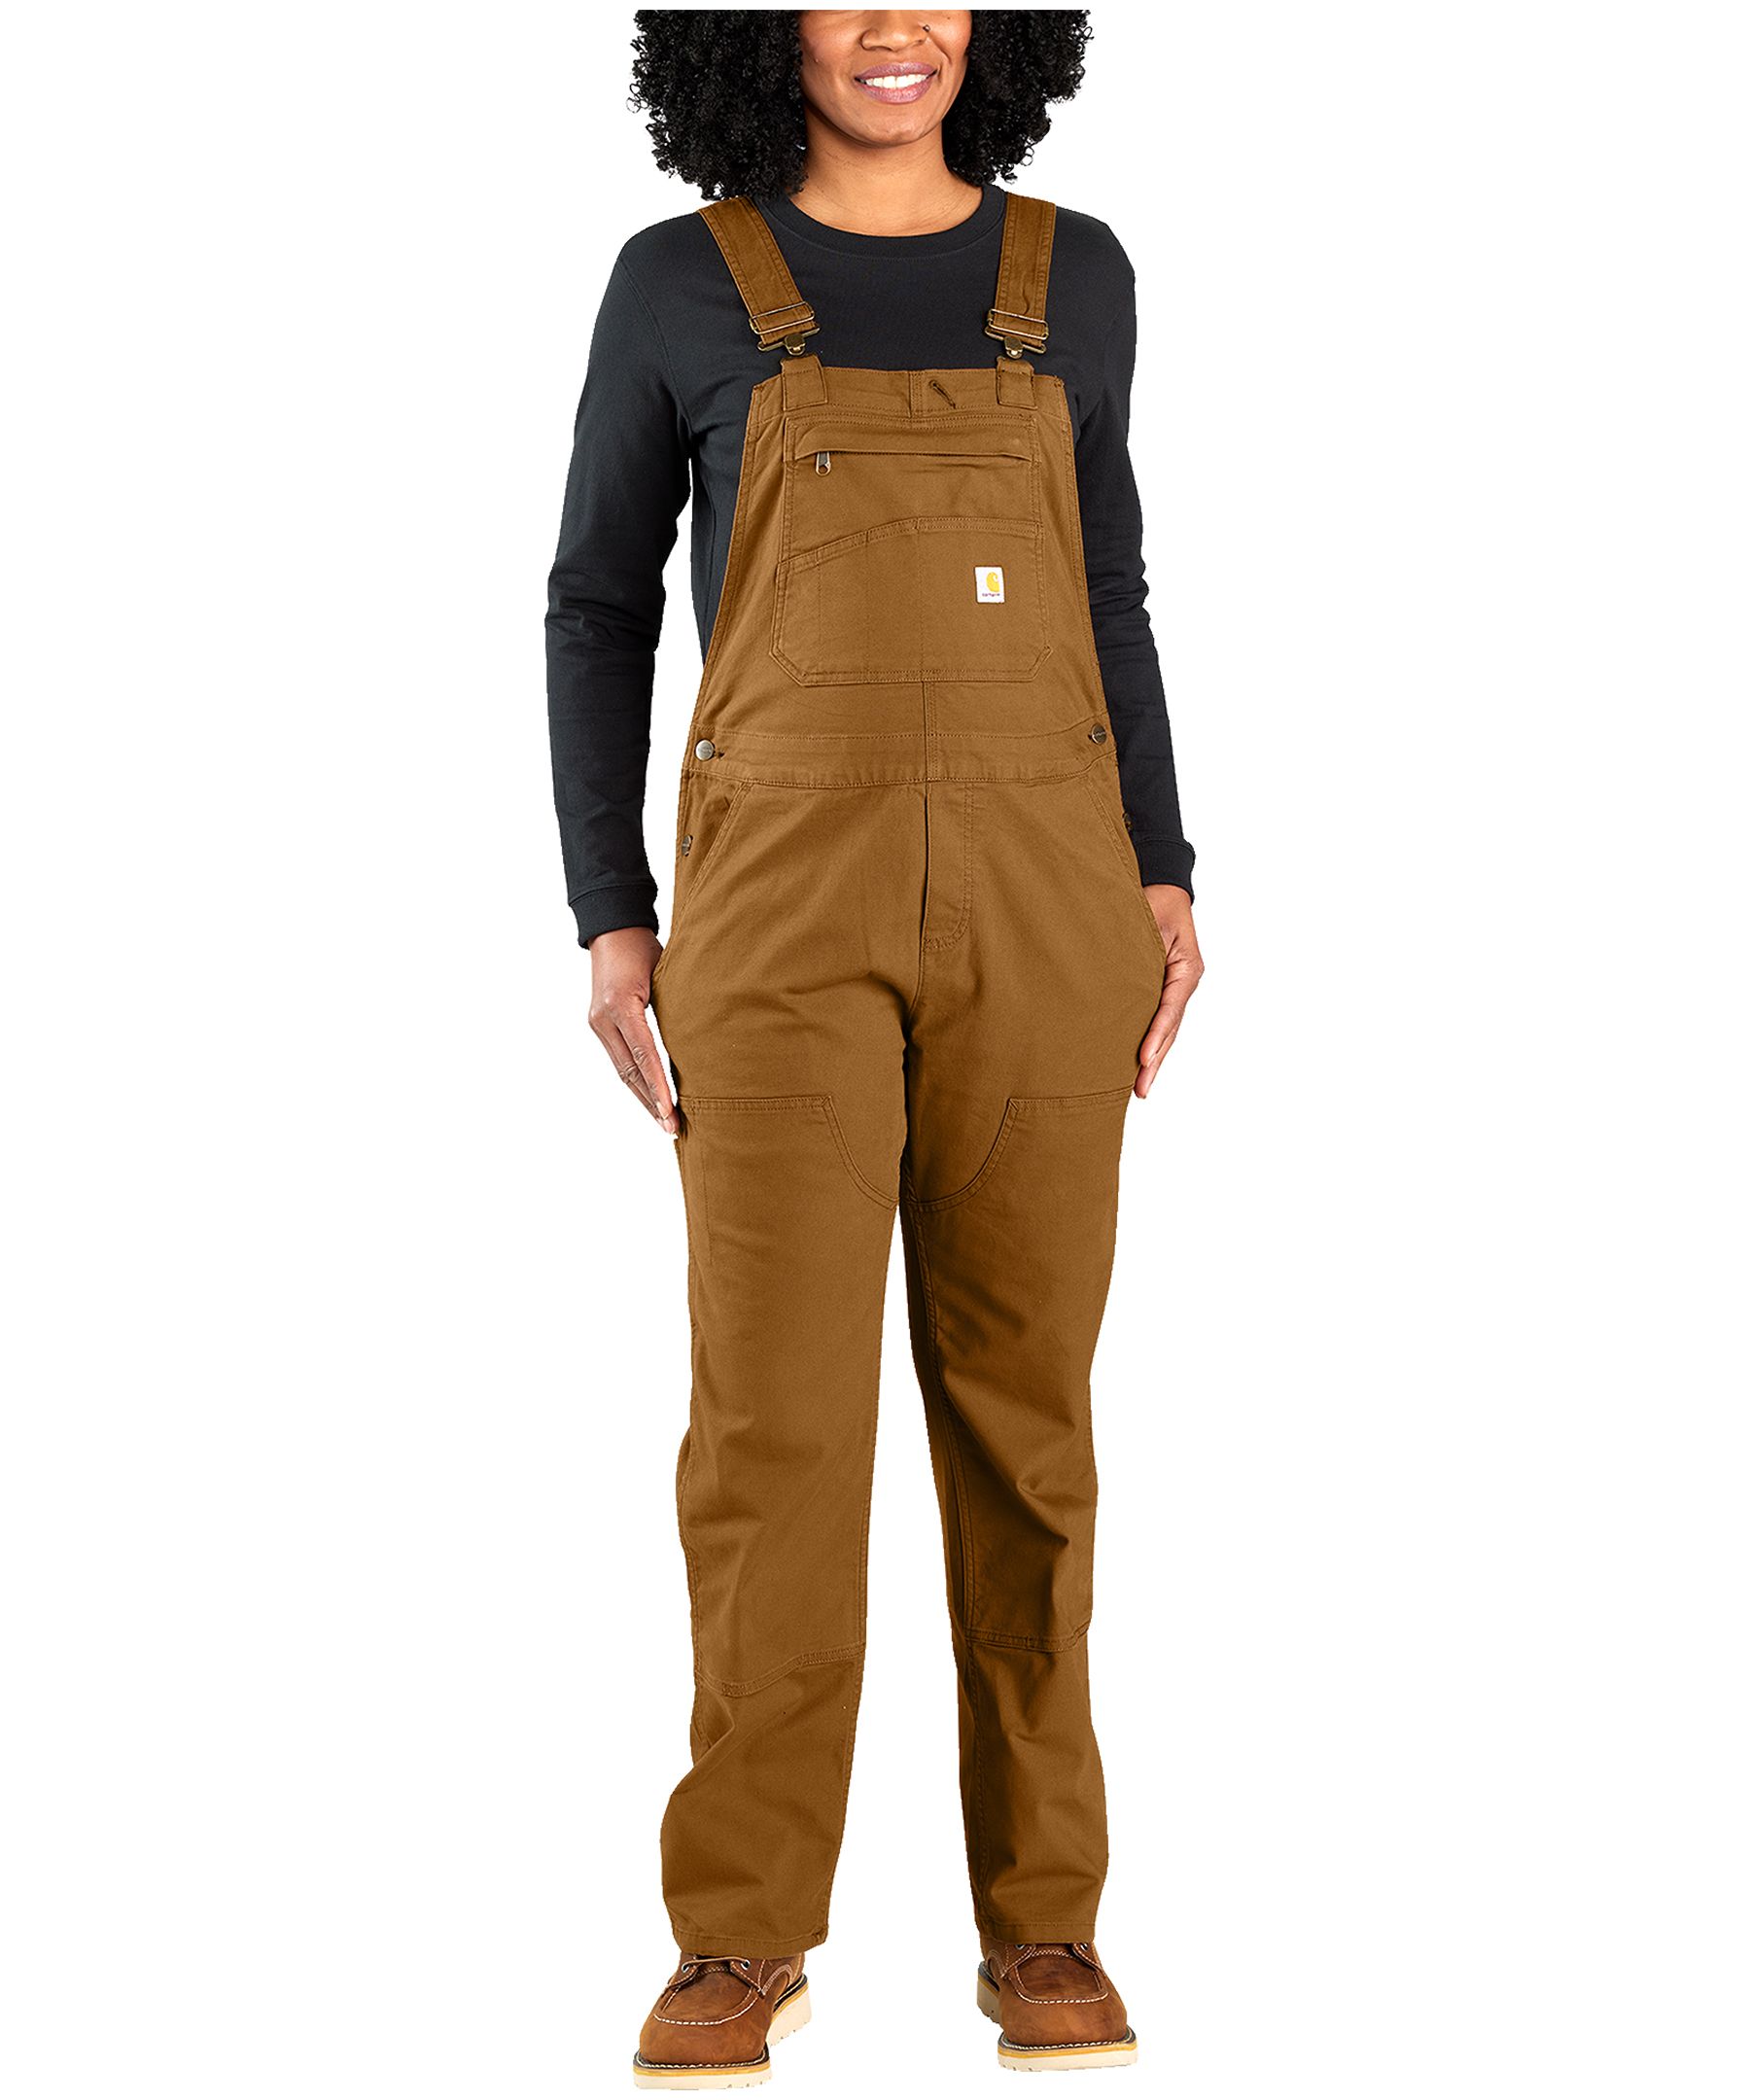 Carhartt Women's Rugged Flex Loose Fit Double Front Canvas Bib Overalls